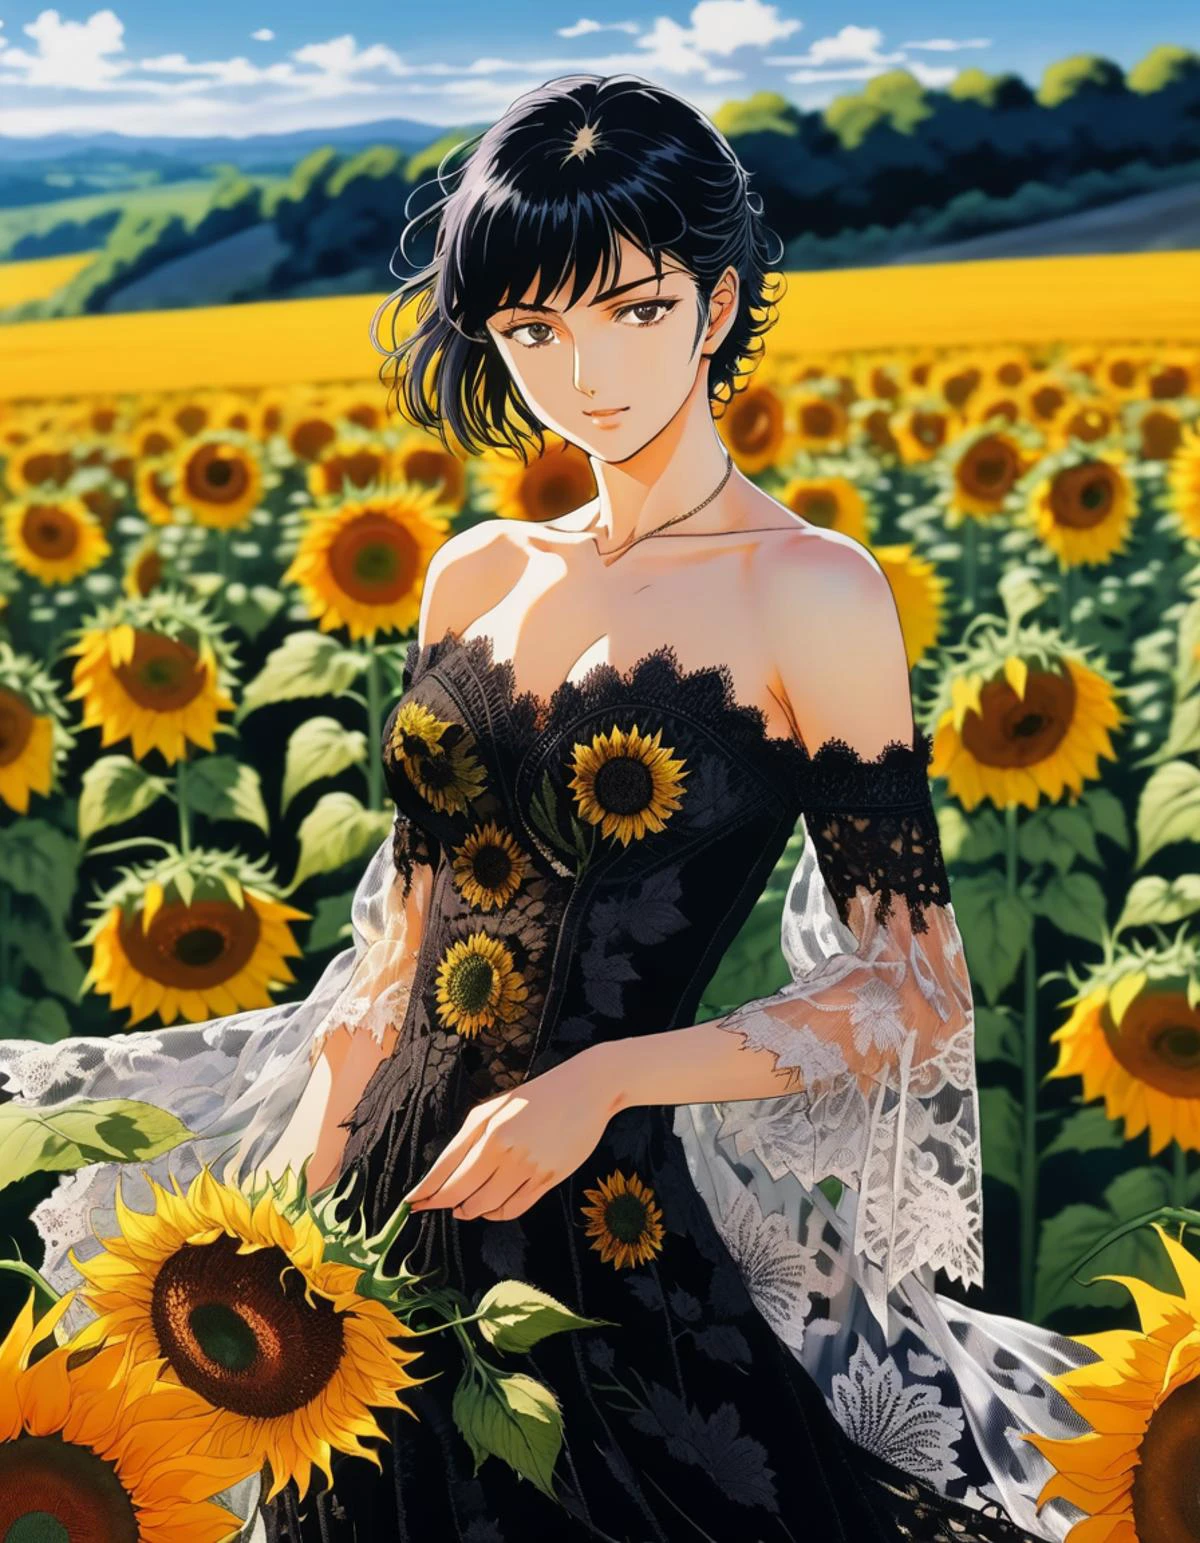 anime manga, berserk, Flaunting a daring, sheer lace gown with strategically placed embroidery and a fitted silhouette, junji ito style, kentaro miura manga art, beautiful anime portrait, Blooming sunflowers, vibrant yellow, sunlit field, cheerful atmosphere, natural beauty